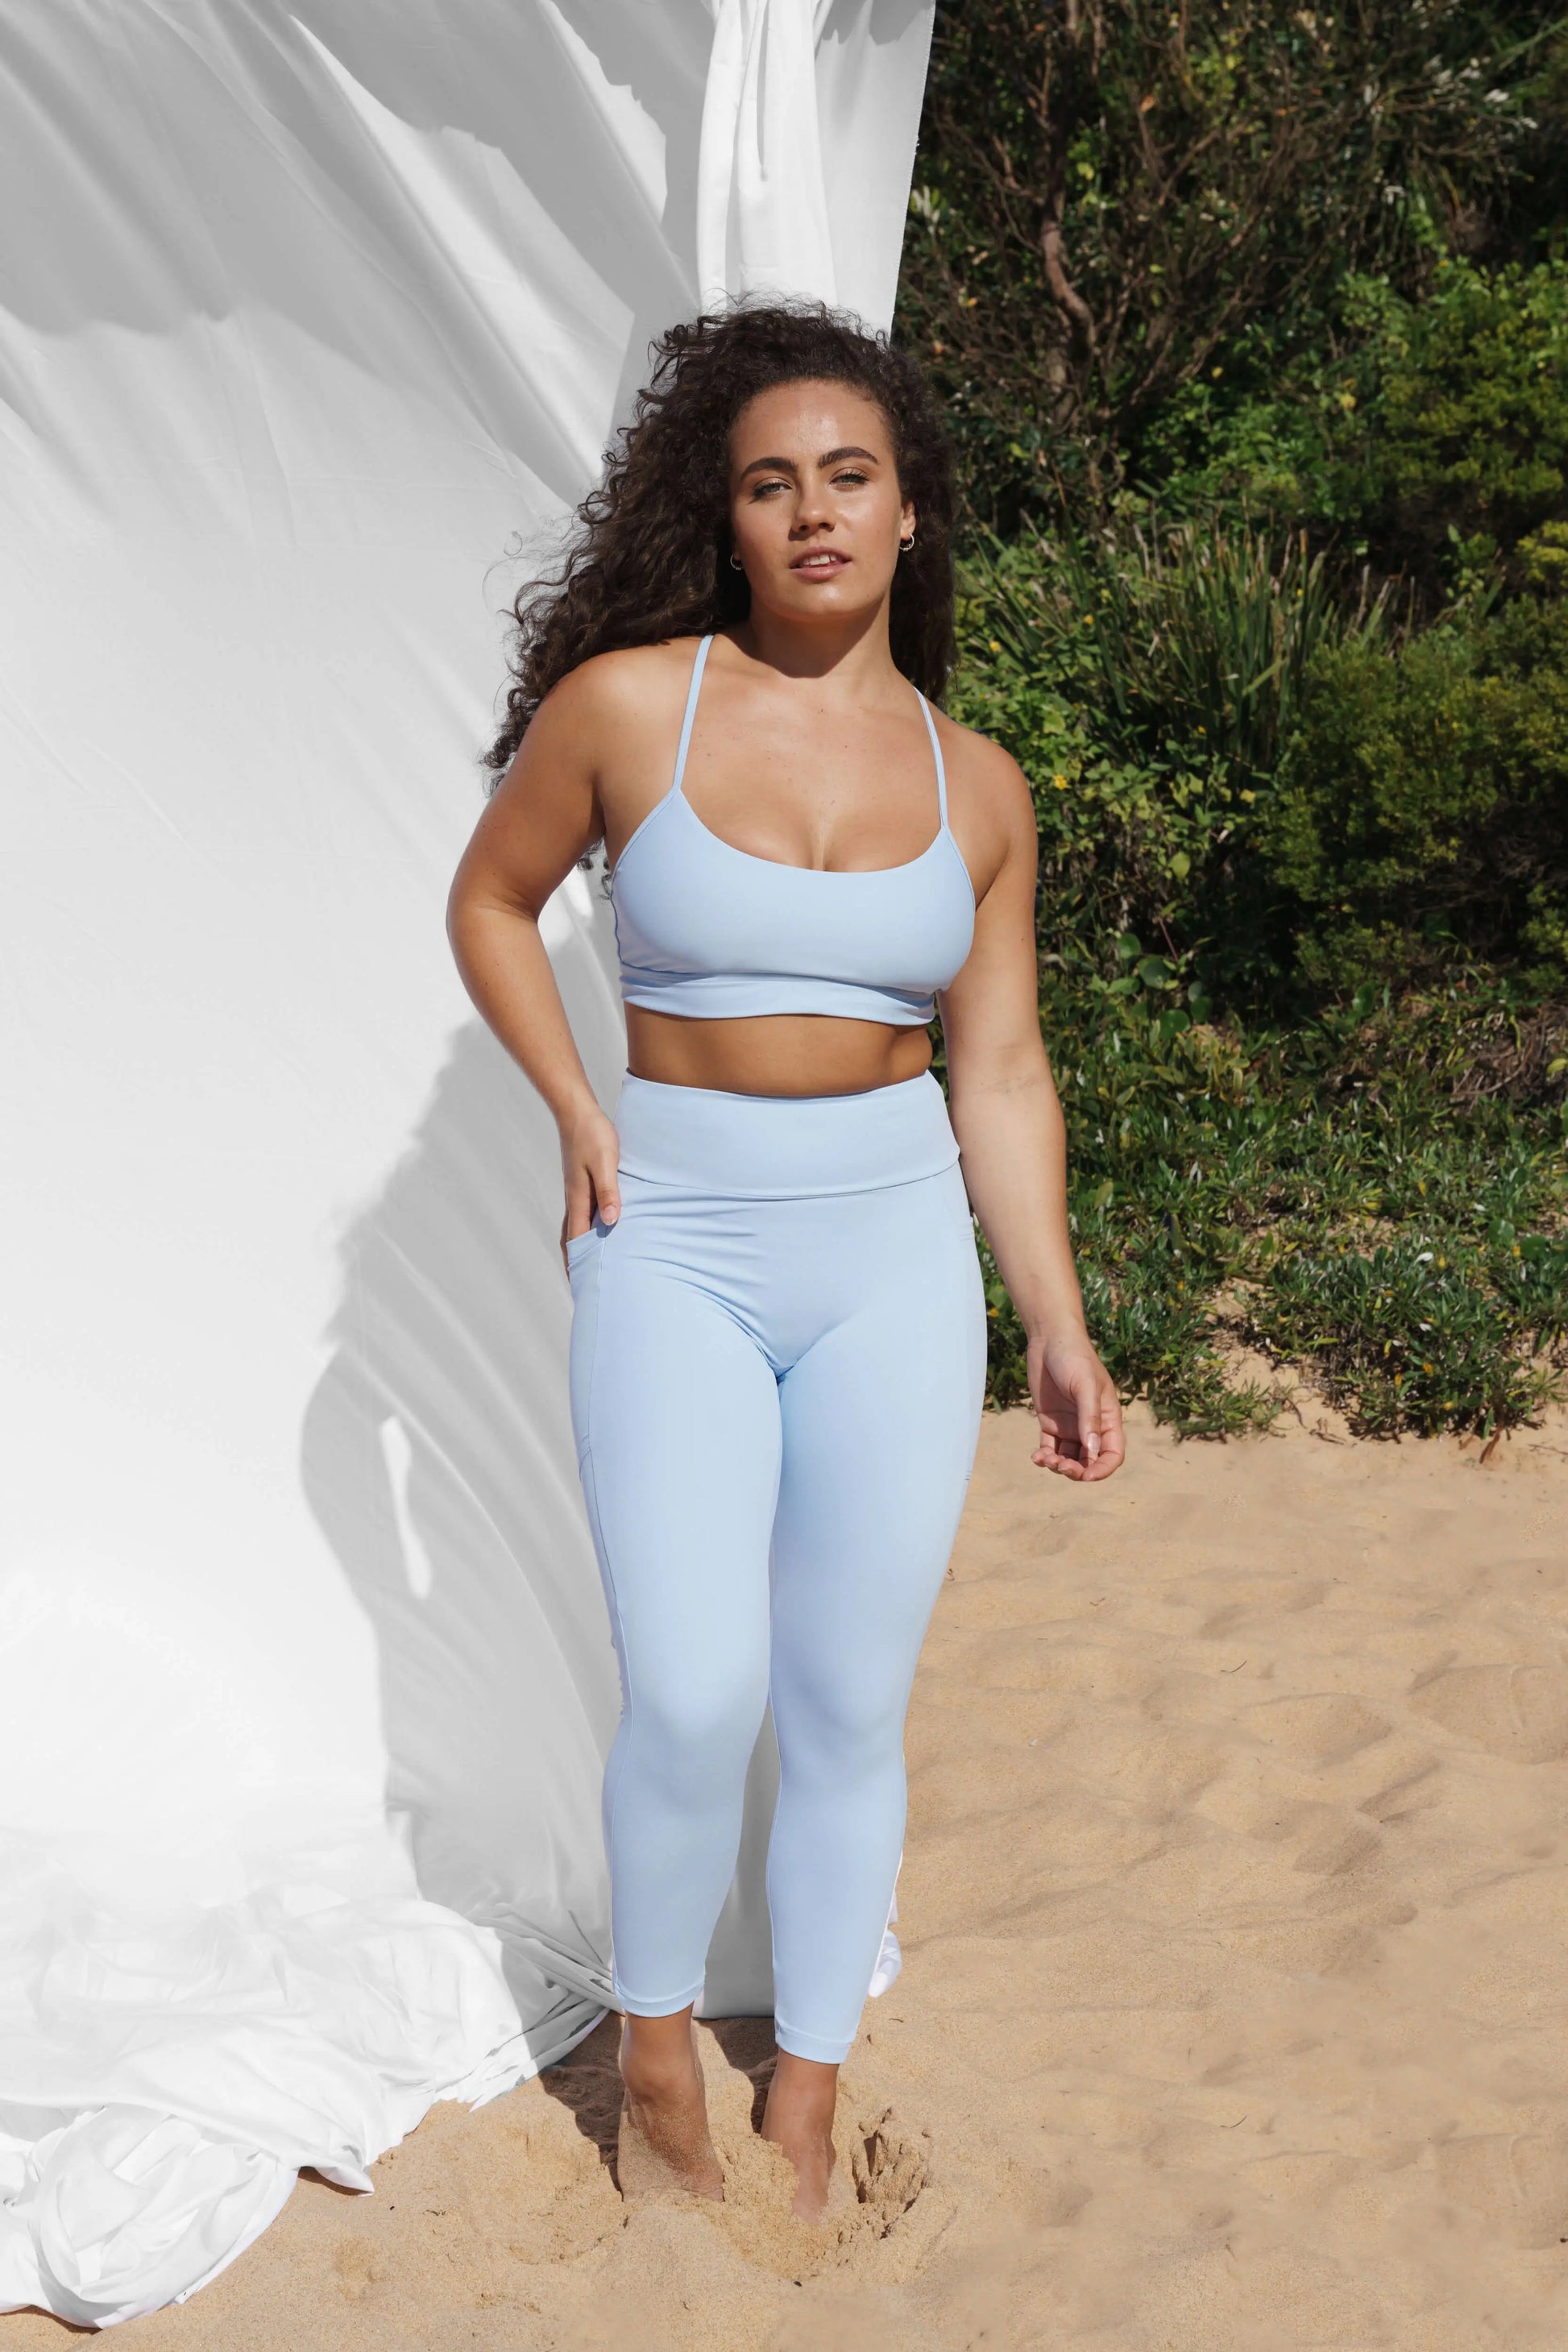 Our model at the beach, facing the front wearing a crystal Allawah legging and Inala crop top